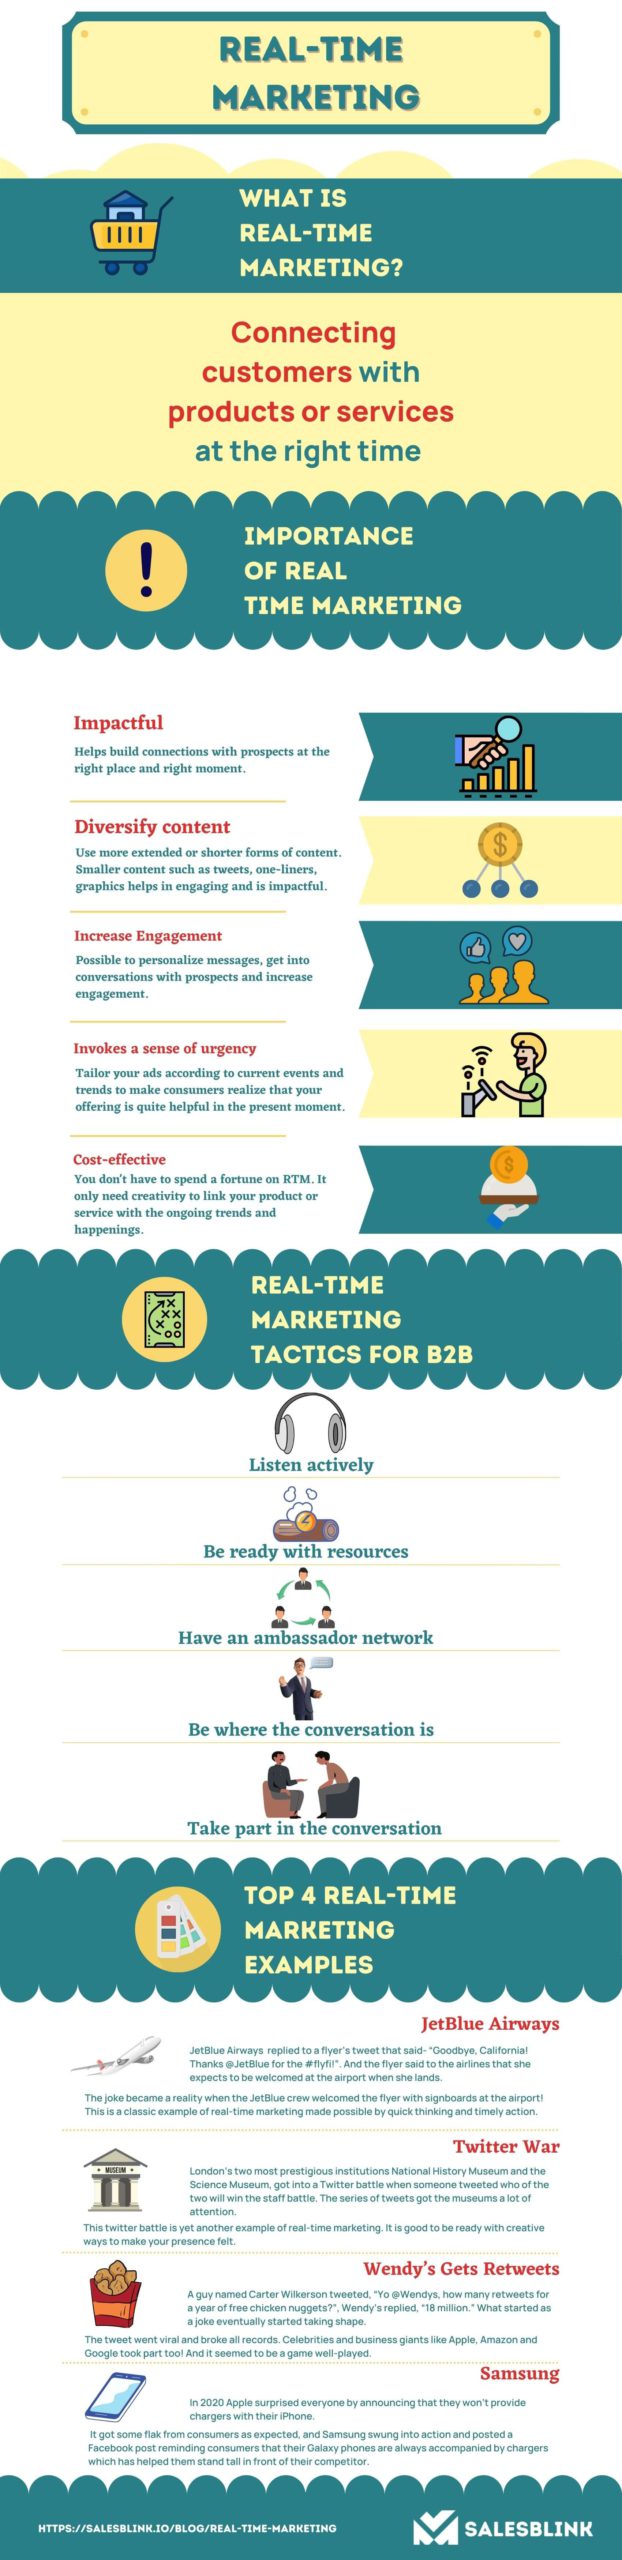 Real Time Marketing - Infographic